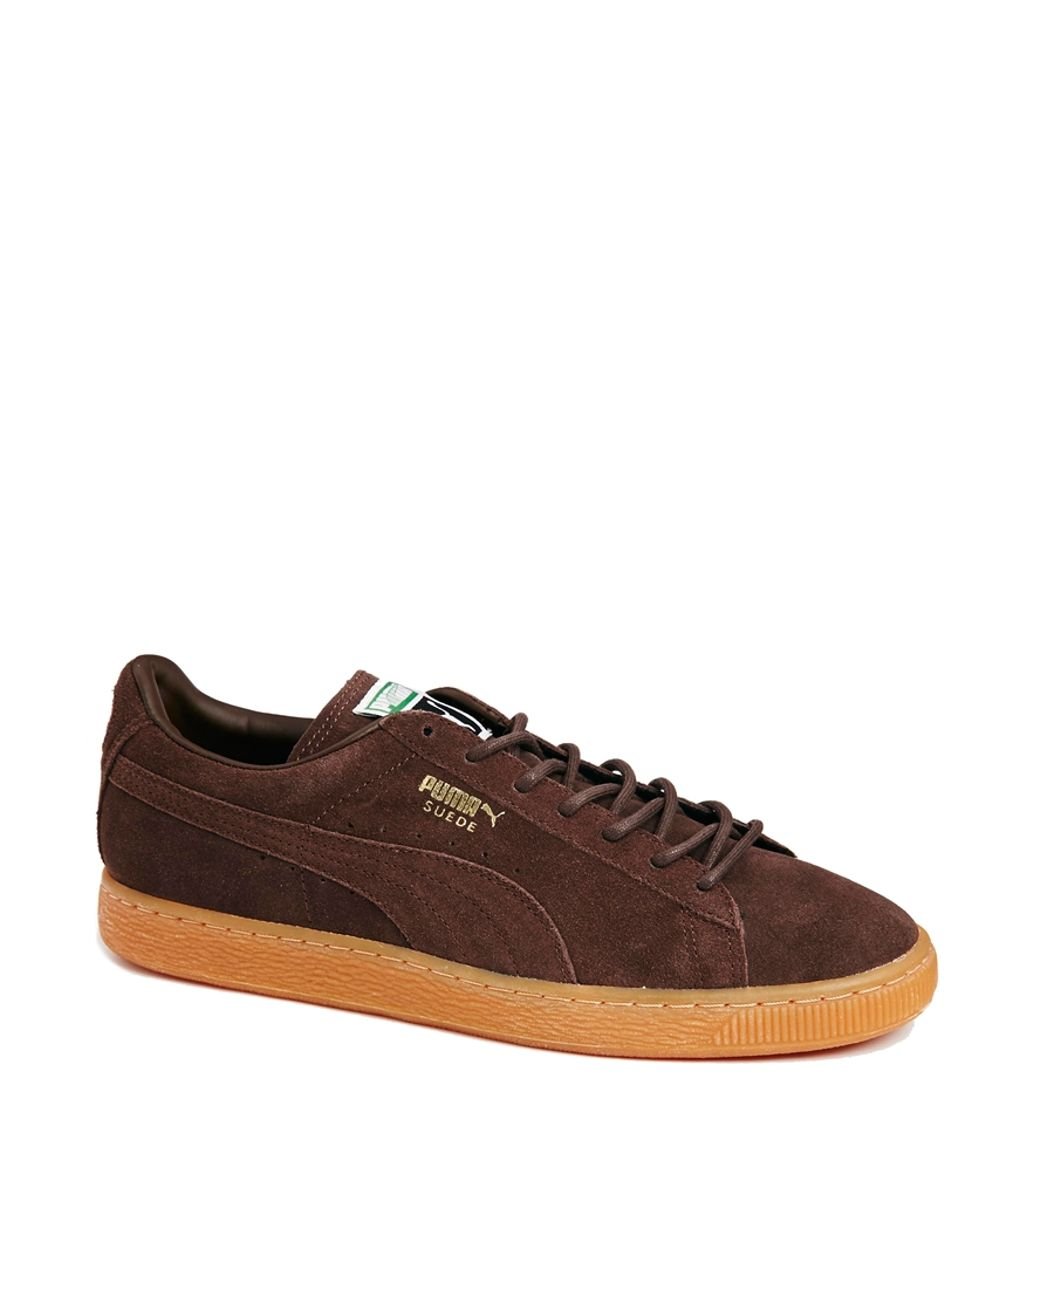 PUMA Trainers Suede Classic in Brown for Men